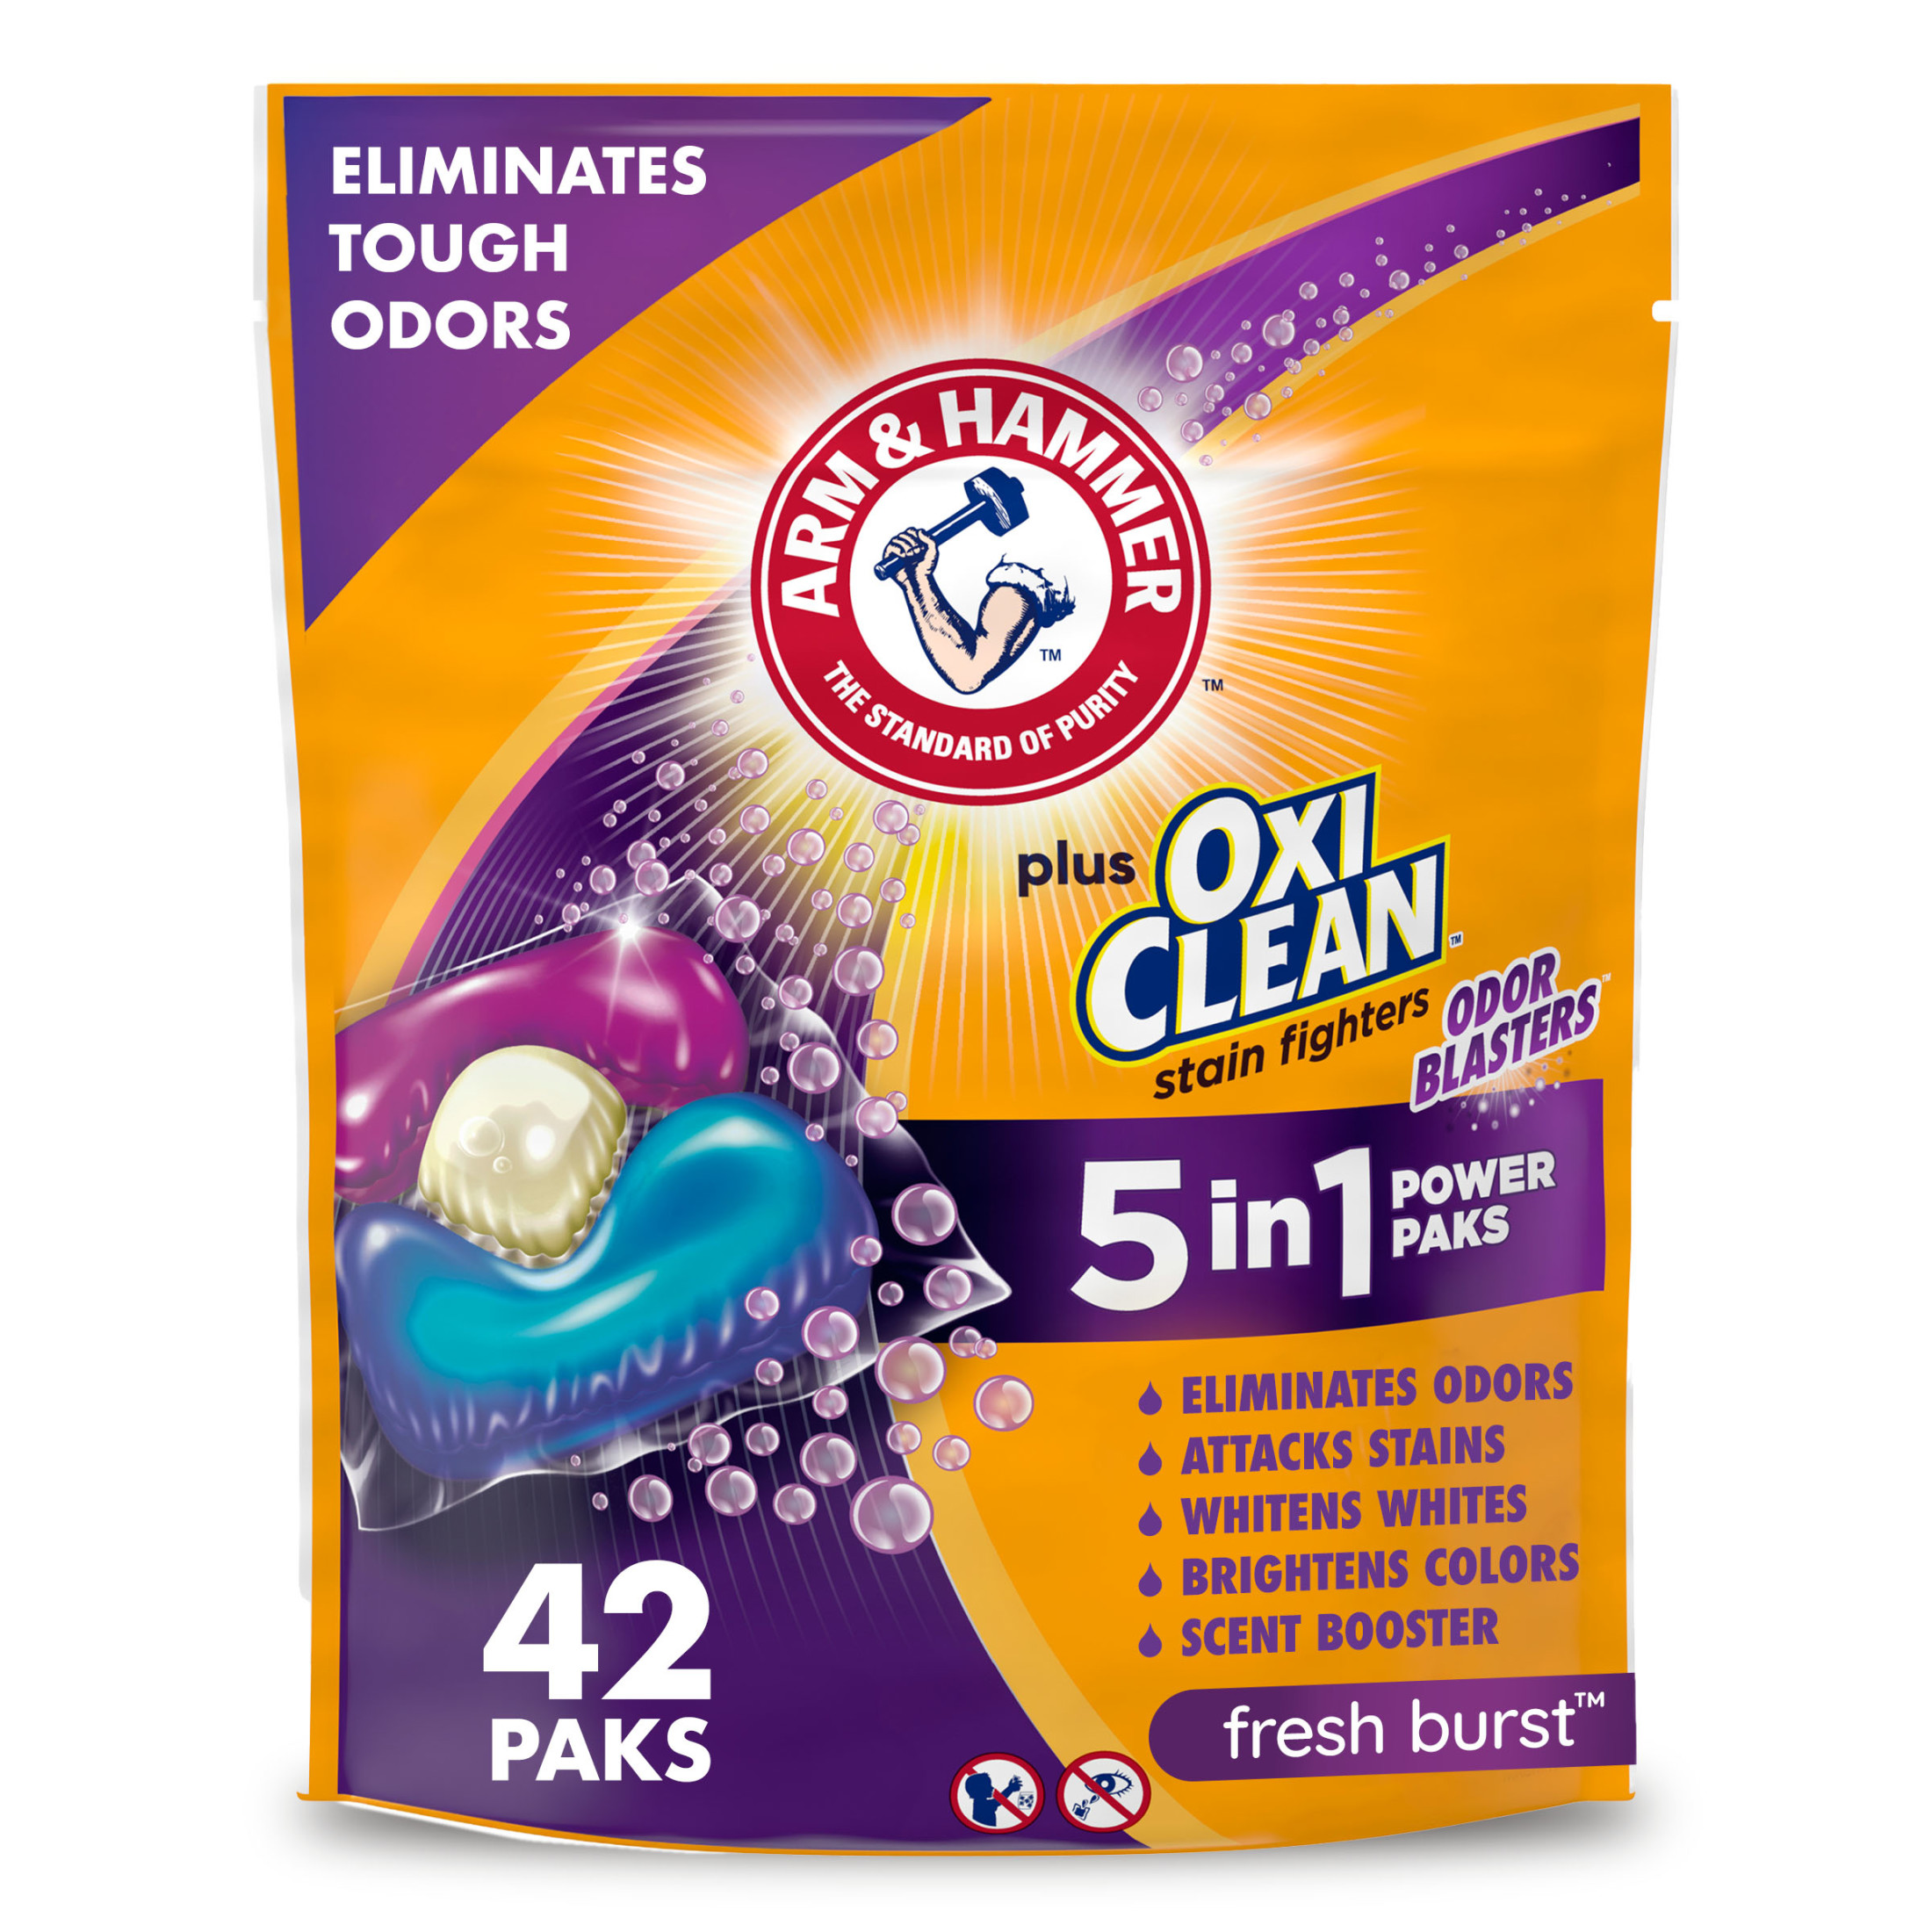 ARM & HAMMER Plus OxiClean Odor Blasters 5-in-1 Laundry Detergent Power Paks, Fresh Burst, 42 Ct - image 1 of 17